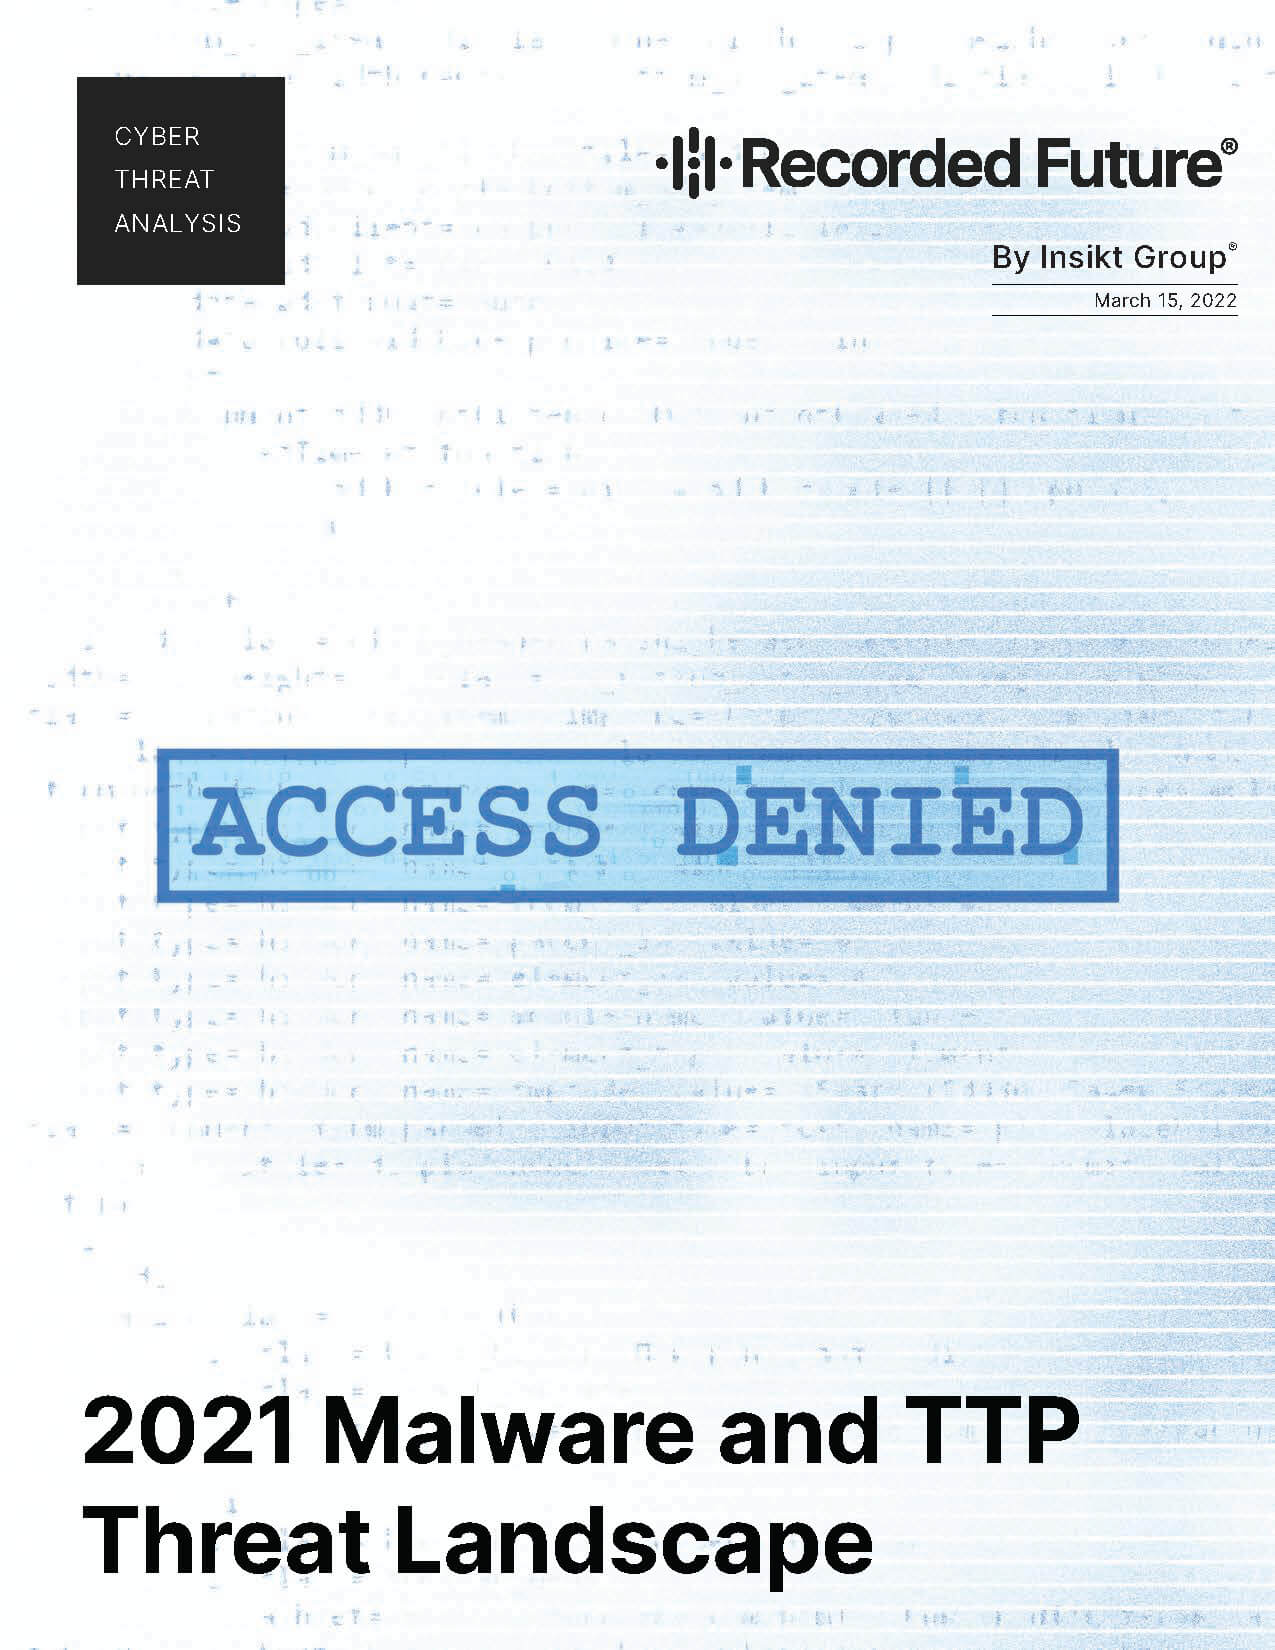 Malware and TTP Threat Landscape